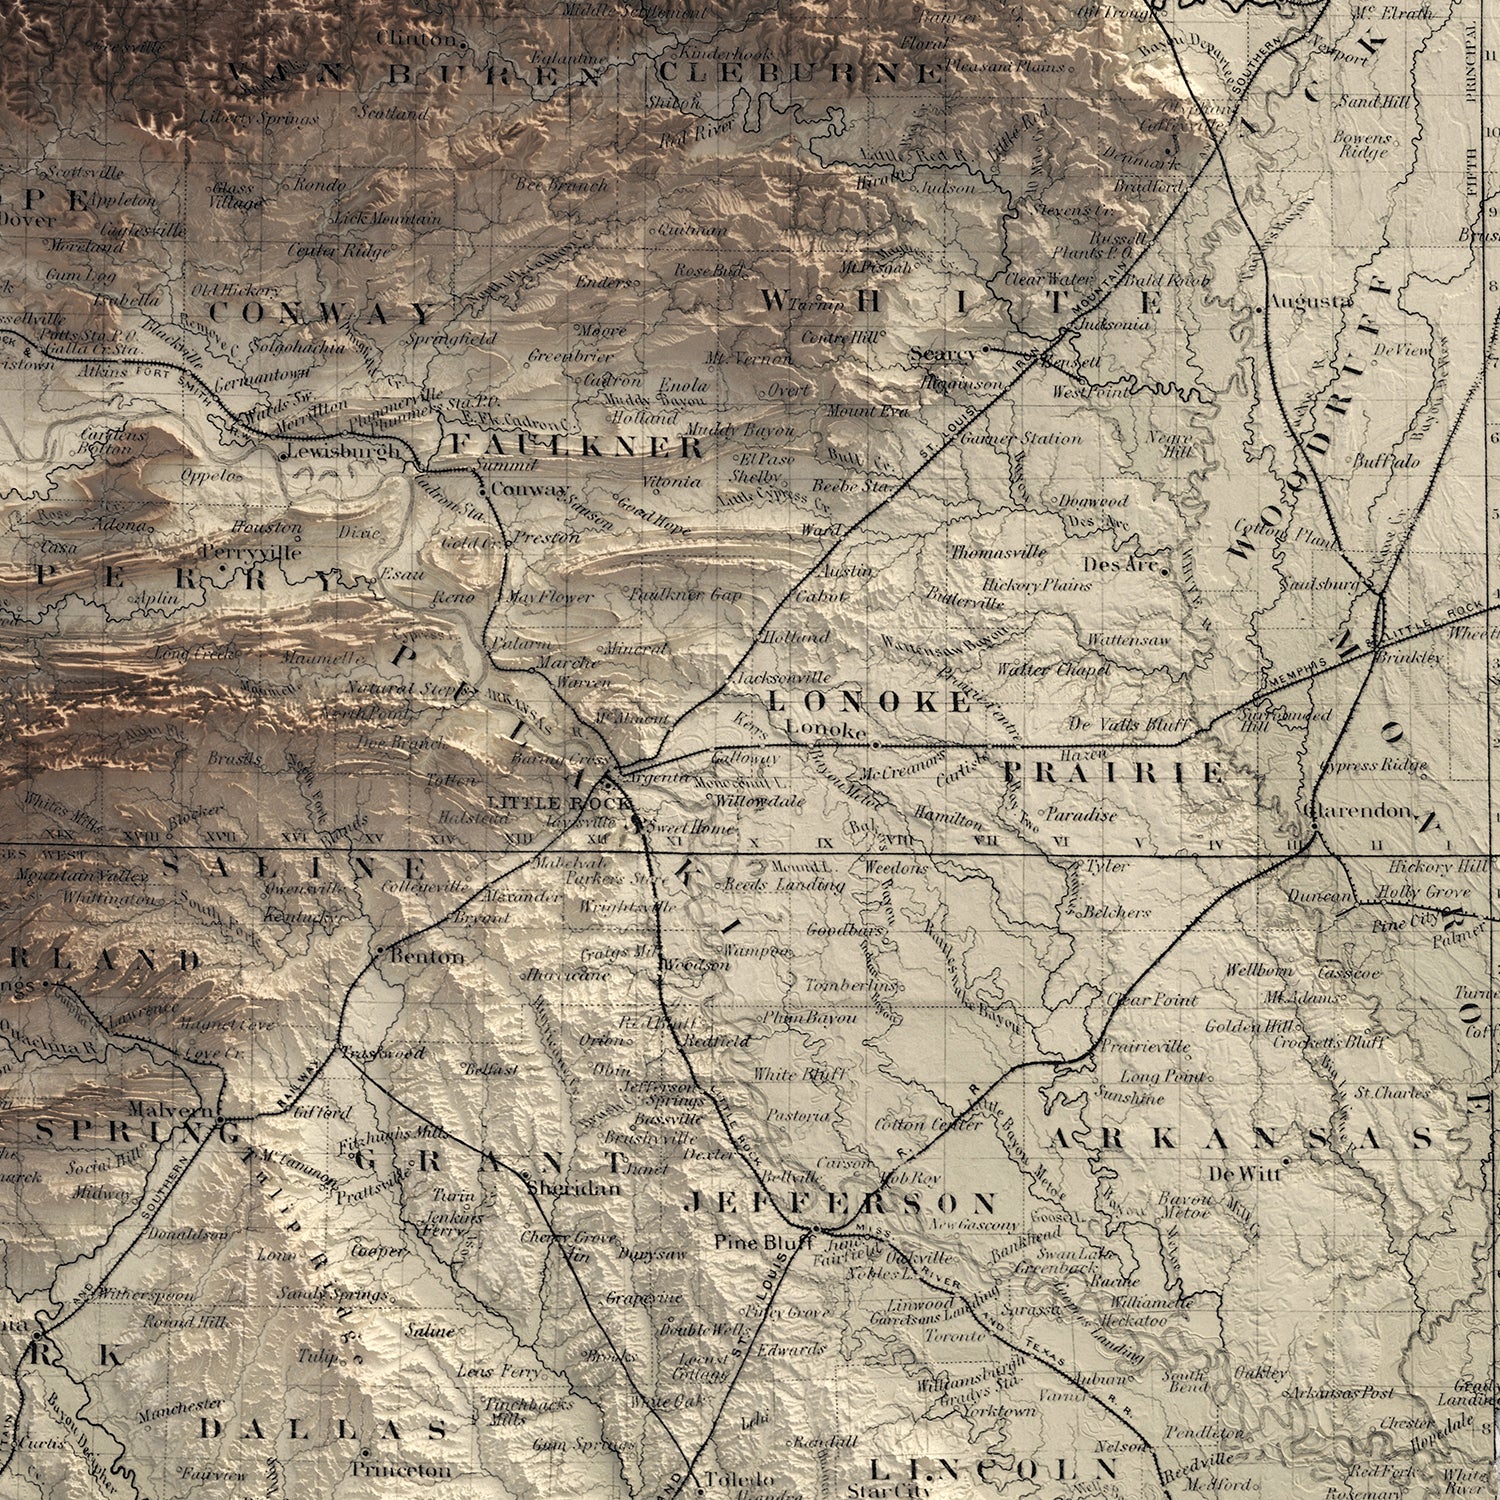 Arkansas - Vintage Shaded Relief Map (1876)